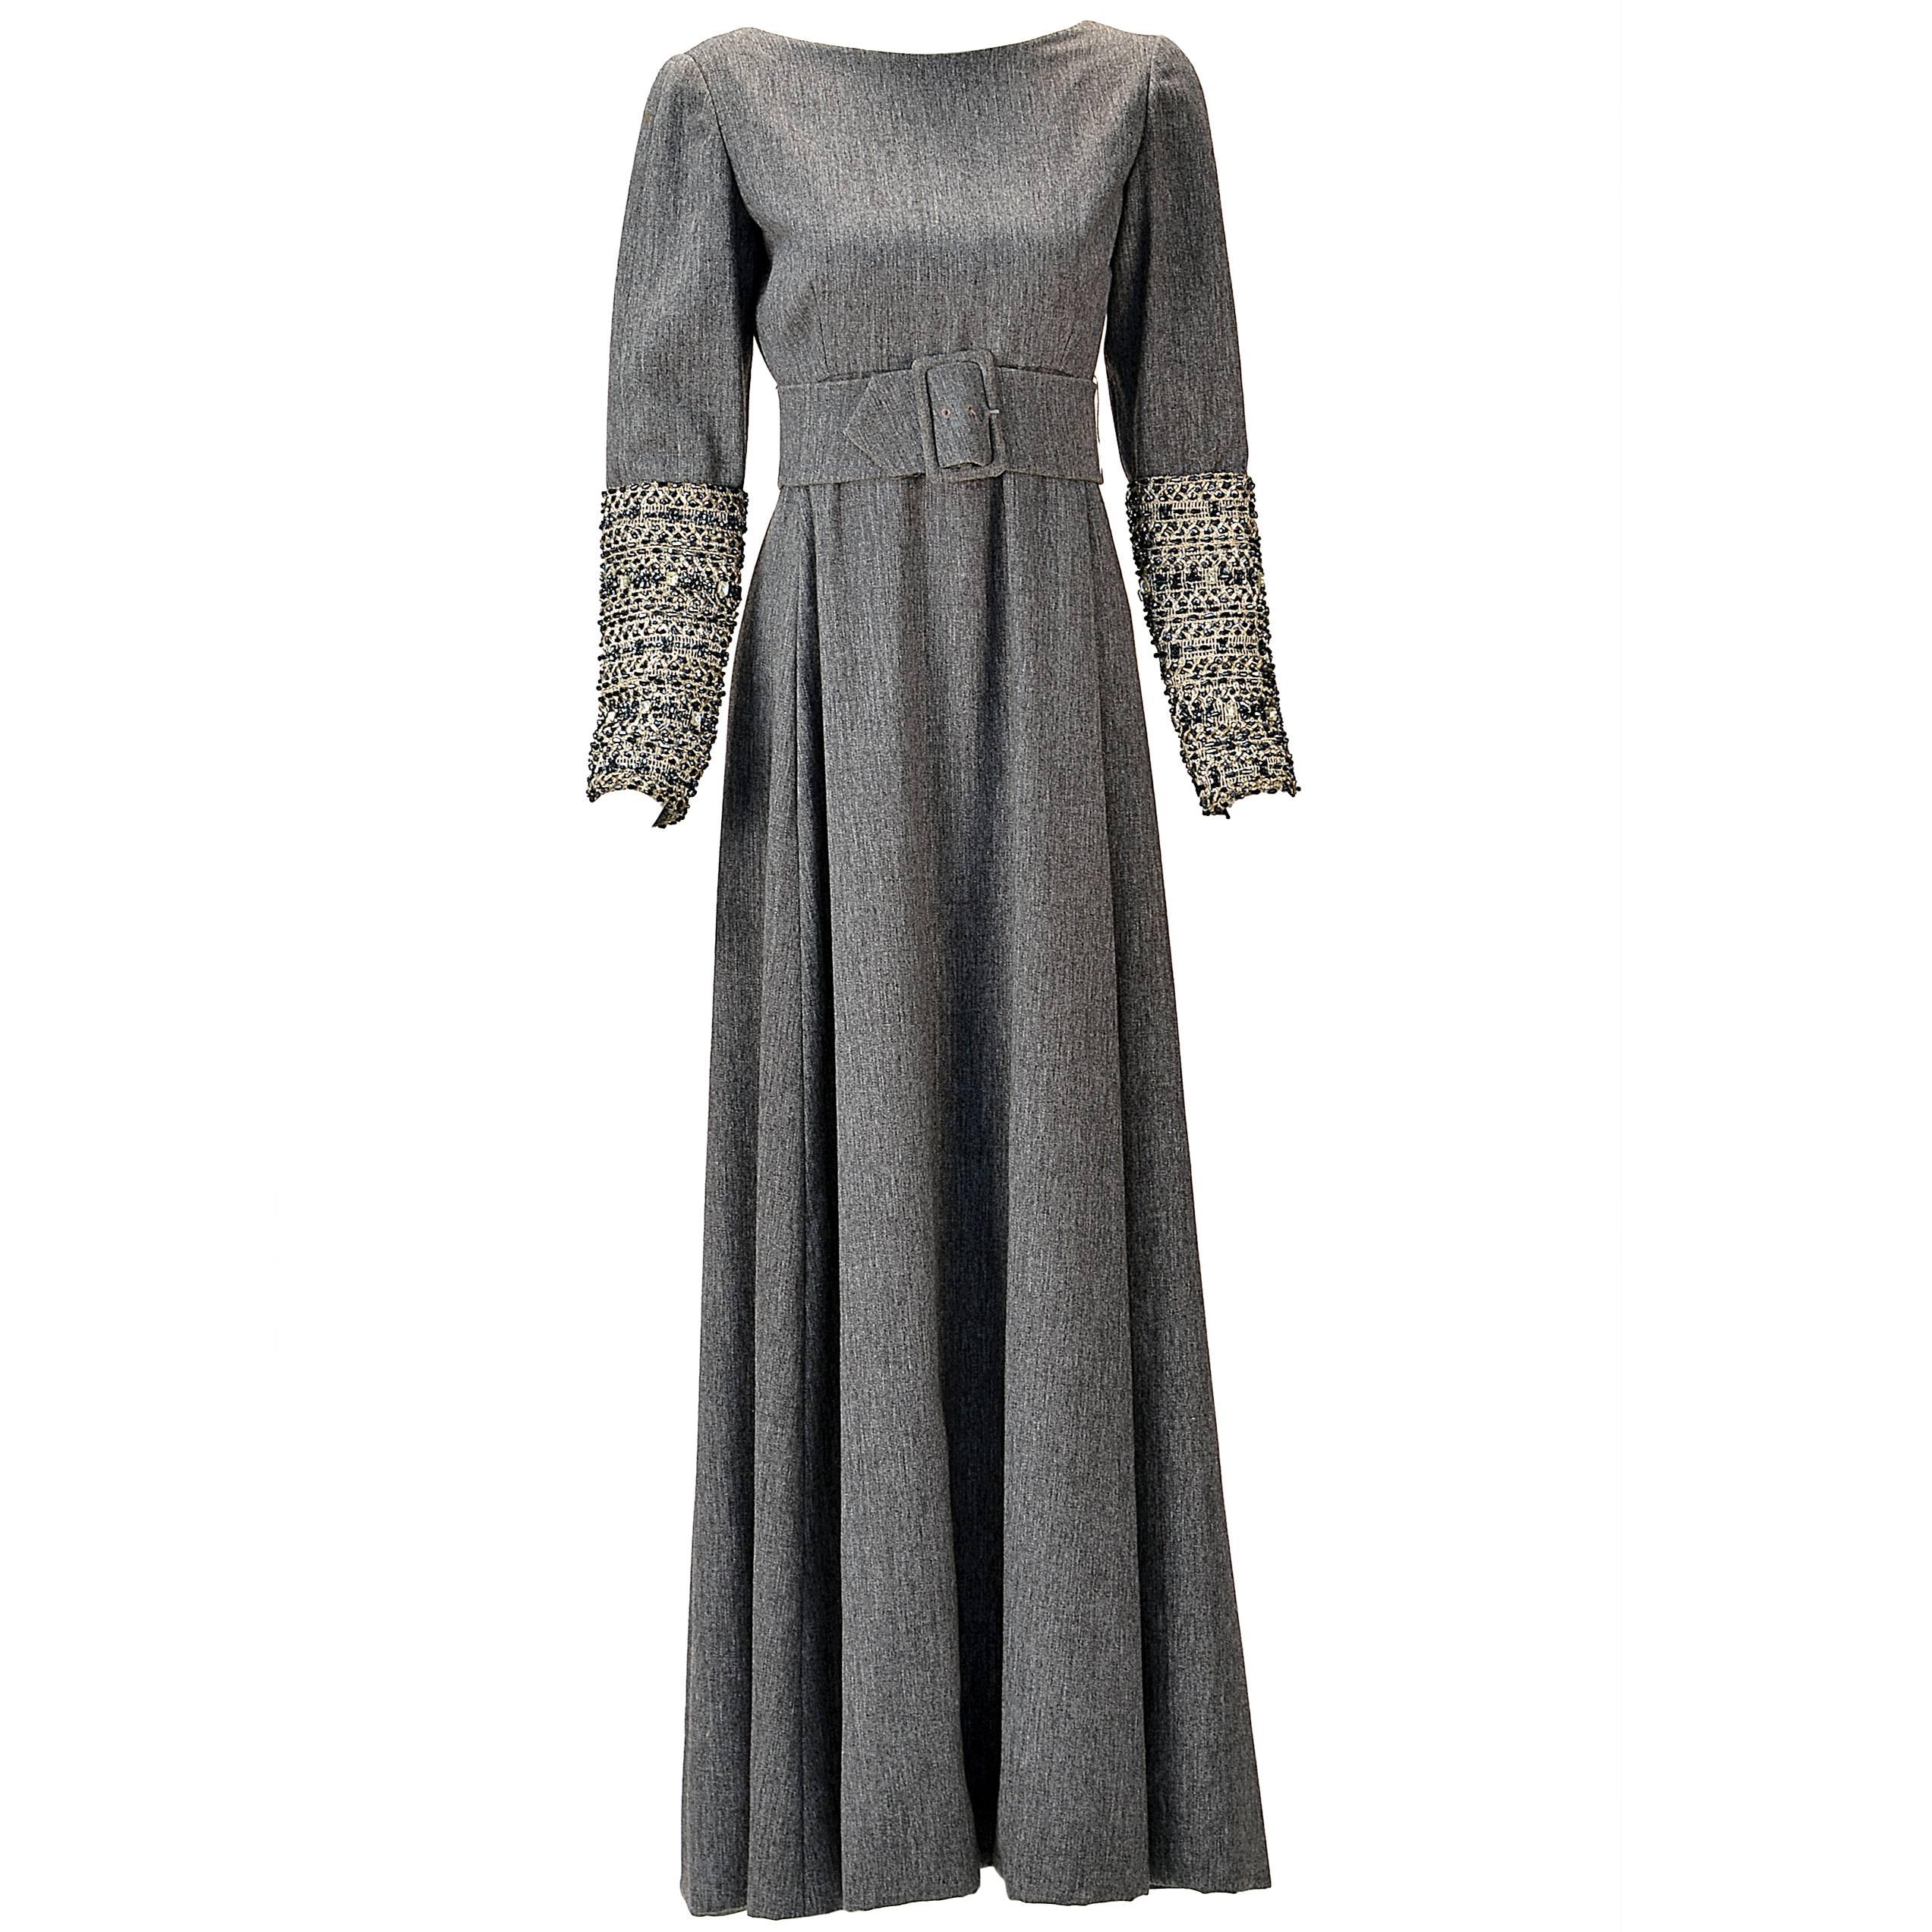 Malcolm Starr Grey Formal Maxi Dress with Embellished Sleeves, 1960s  For Sale